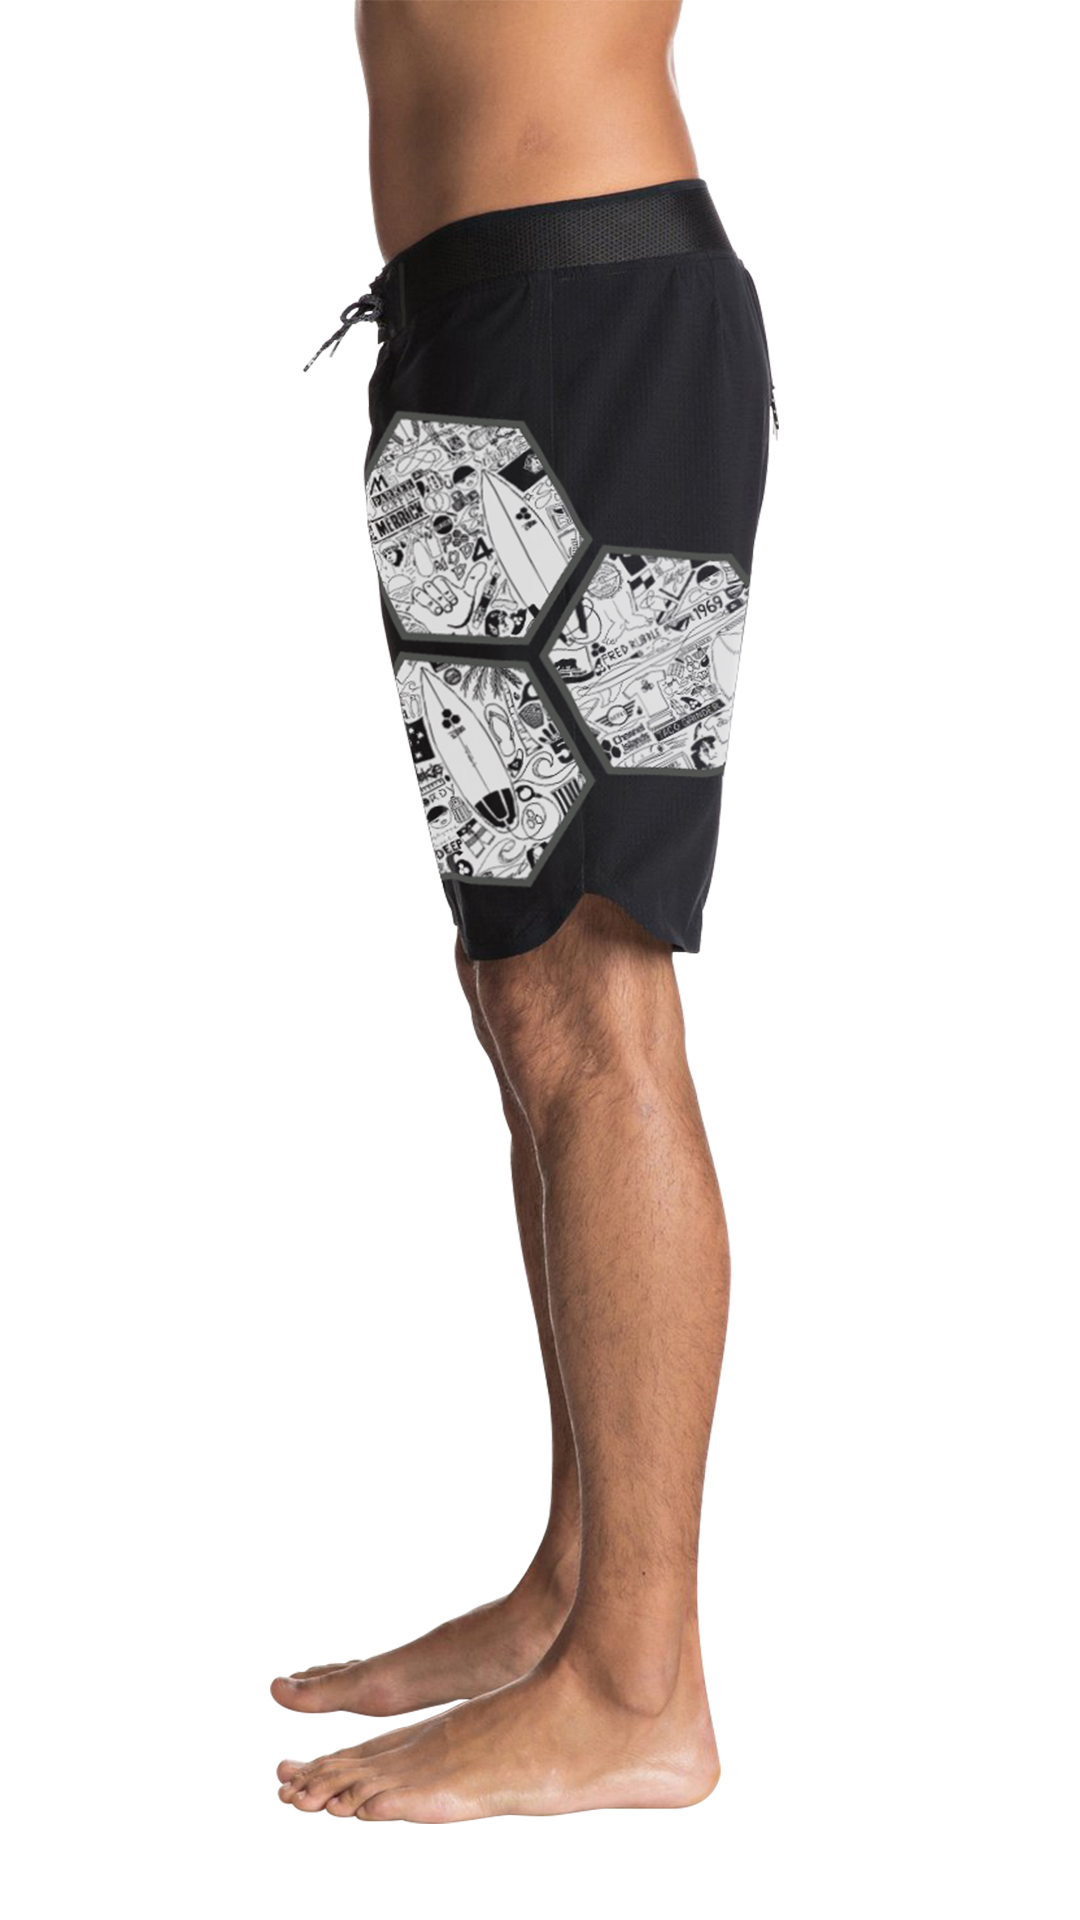 Channel Islands Surfboards Iconoflage Black Shorts